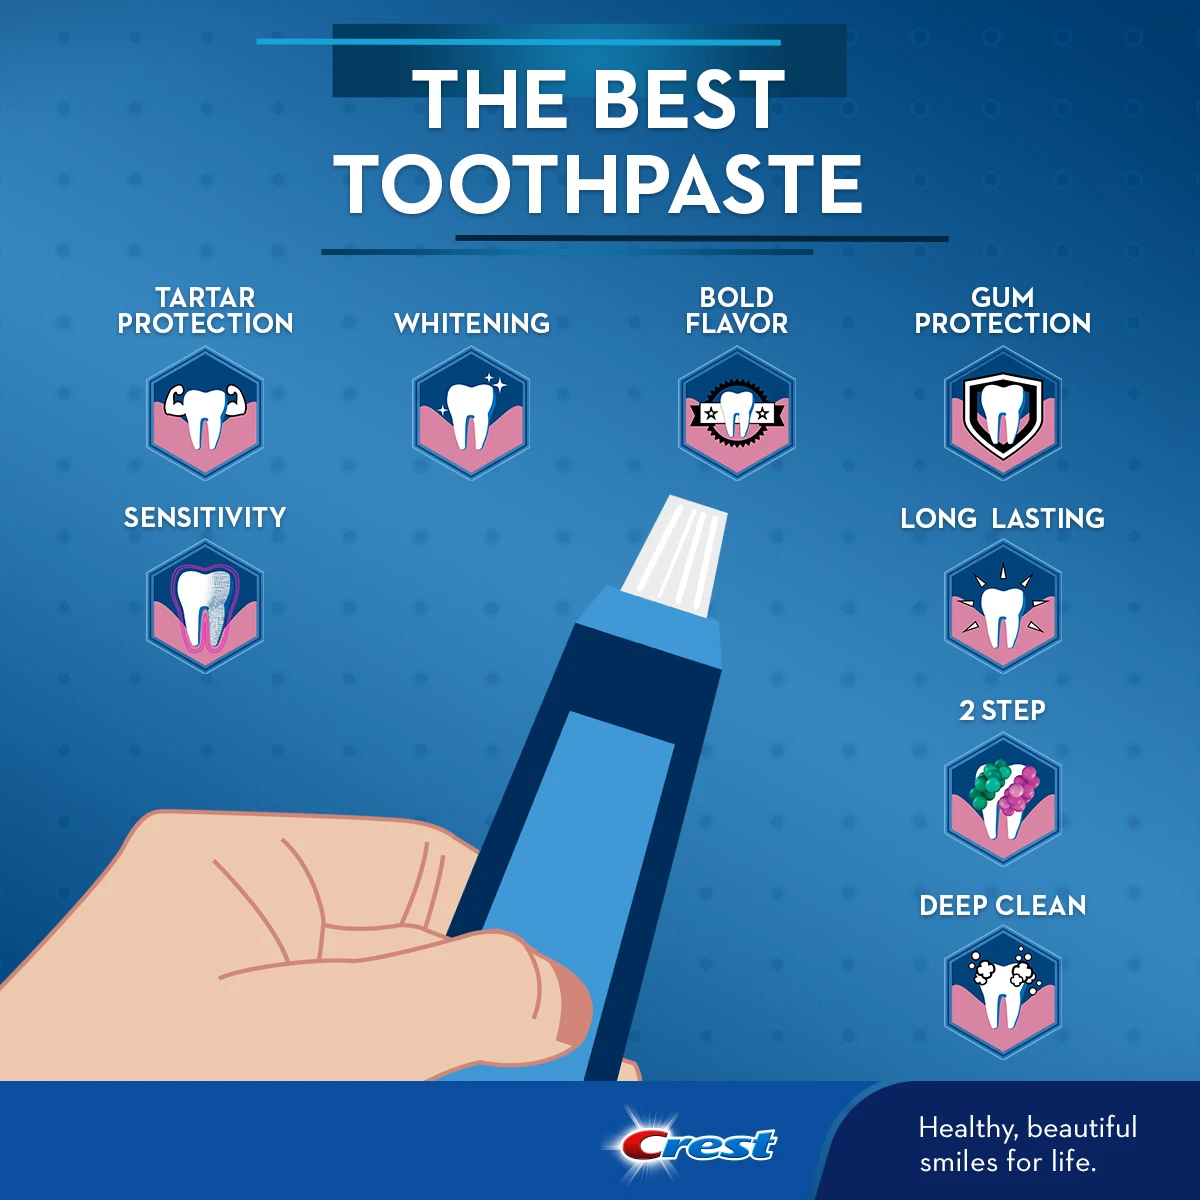 Characteristics of the Best Toothpaste